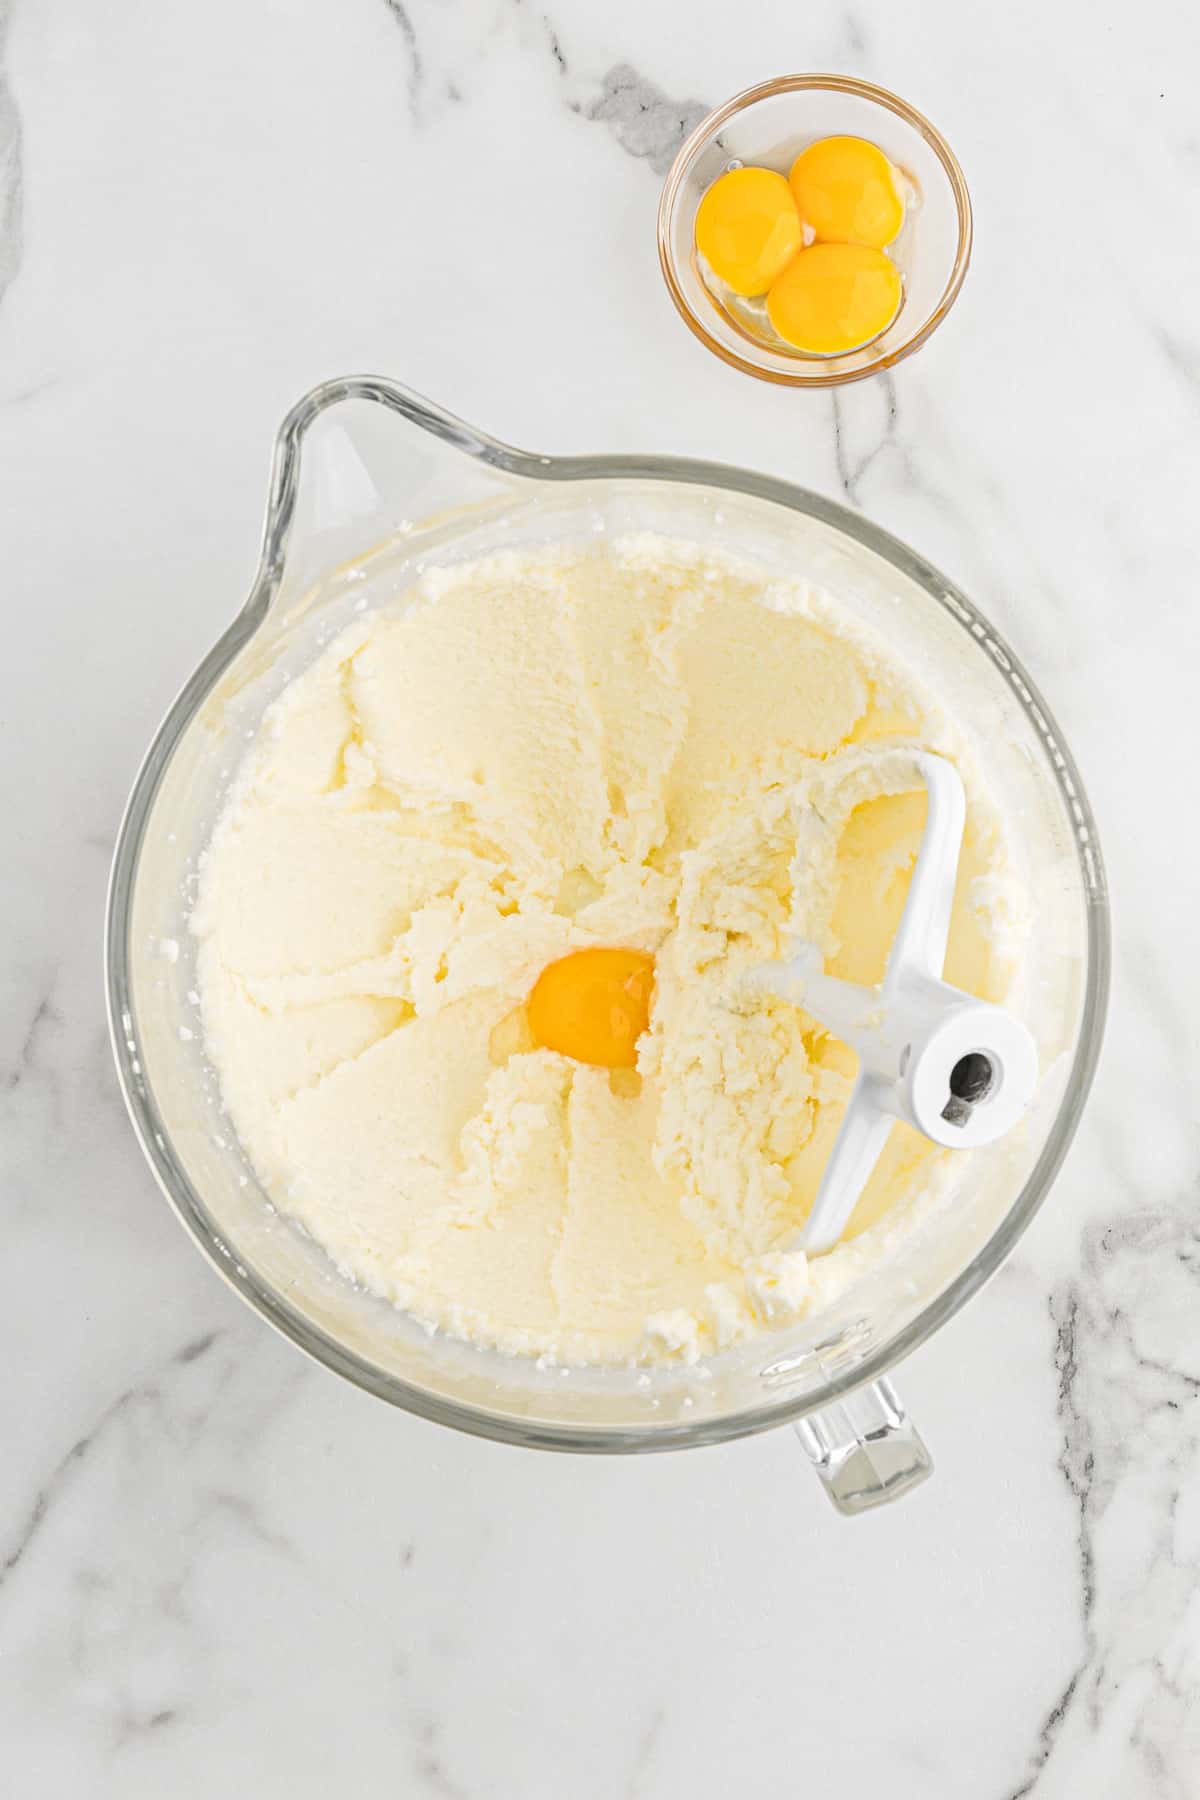 Butter and sugar mixed together in a mixing bowl with an egg added.